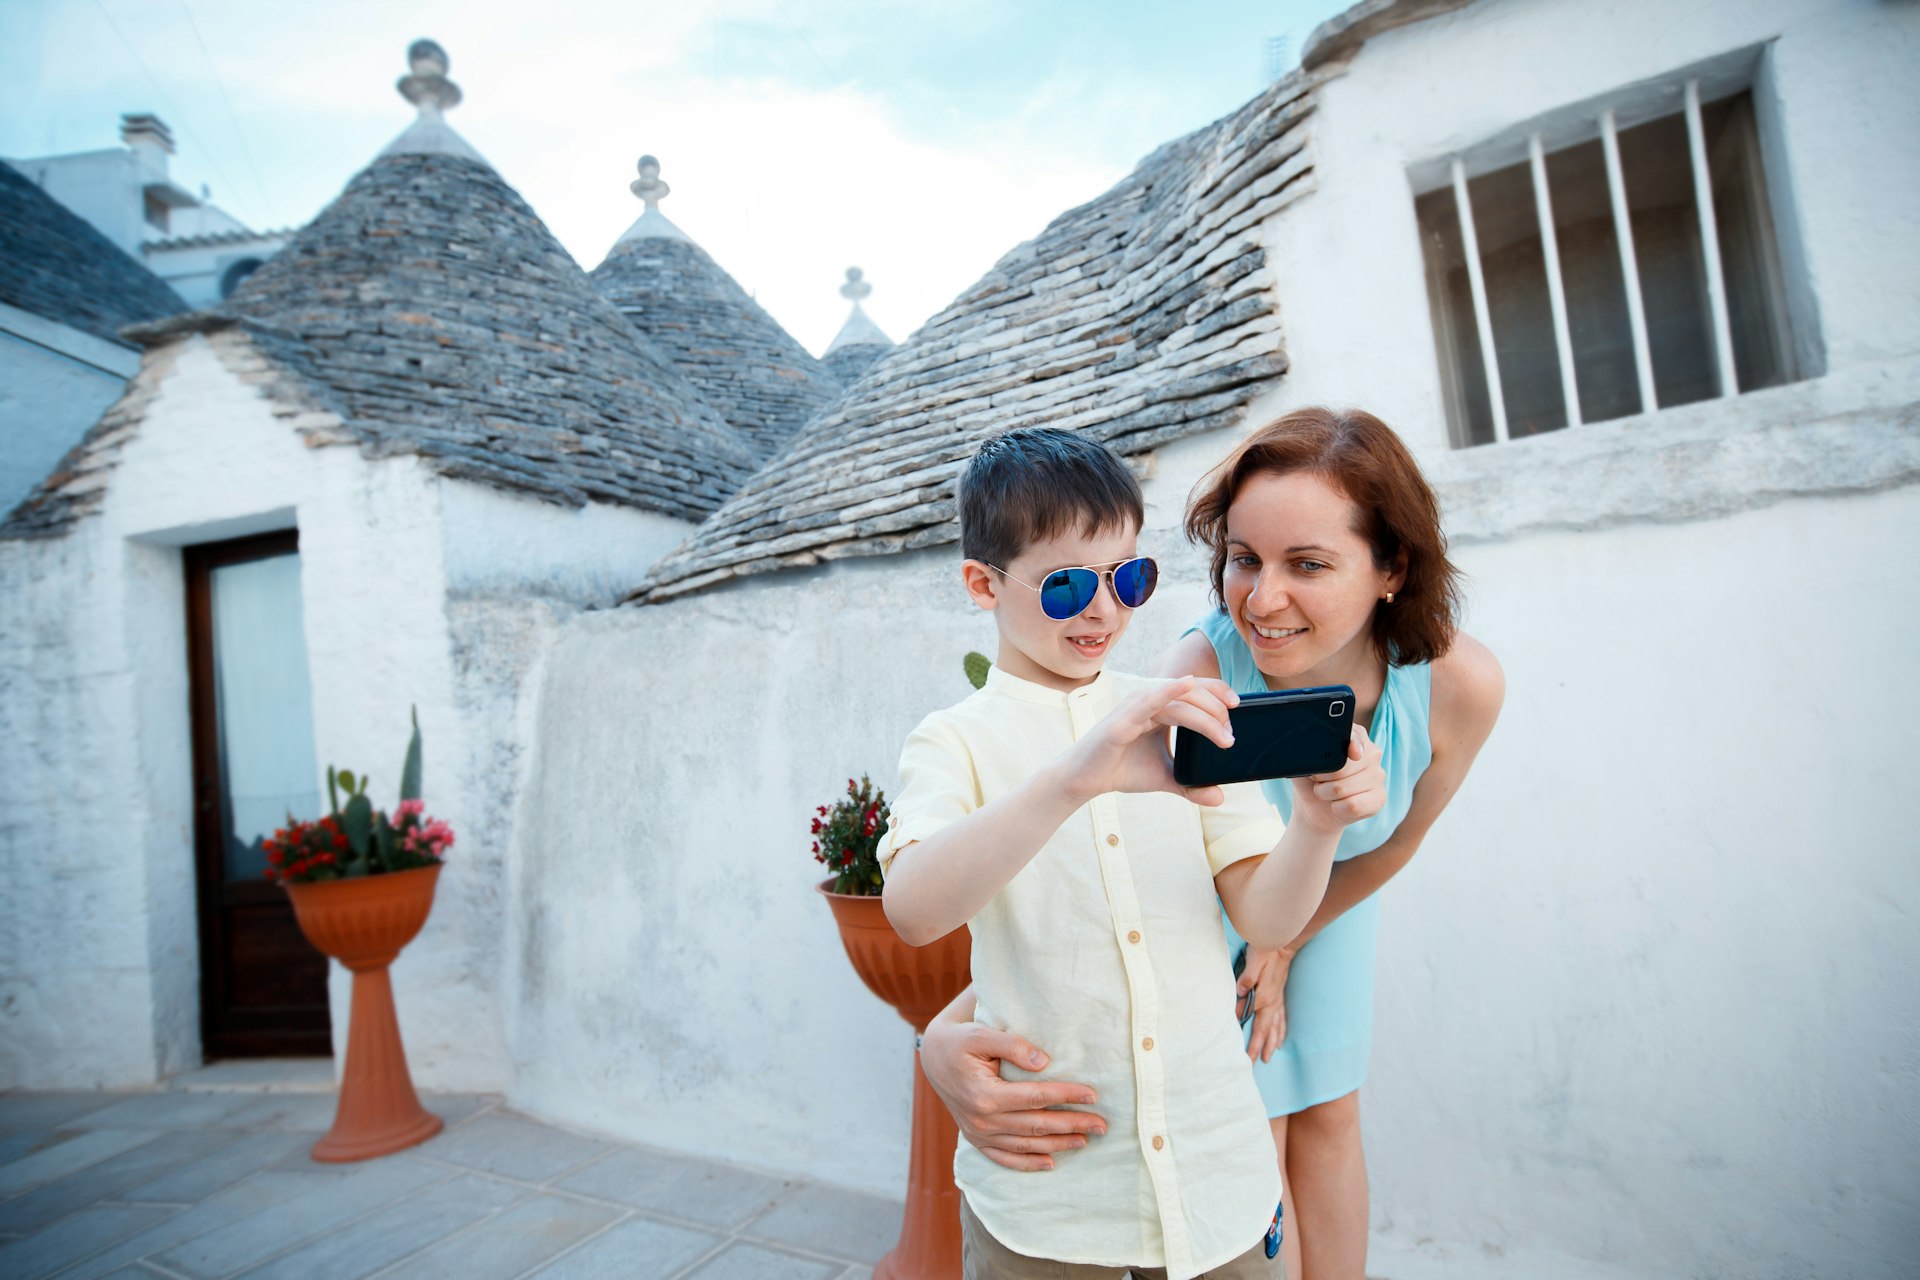 A mother and son pose for a photograph in a town with lots of low-rise round white-stone buildings